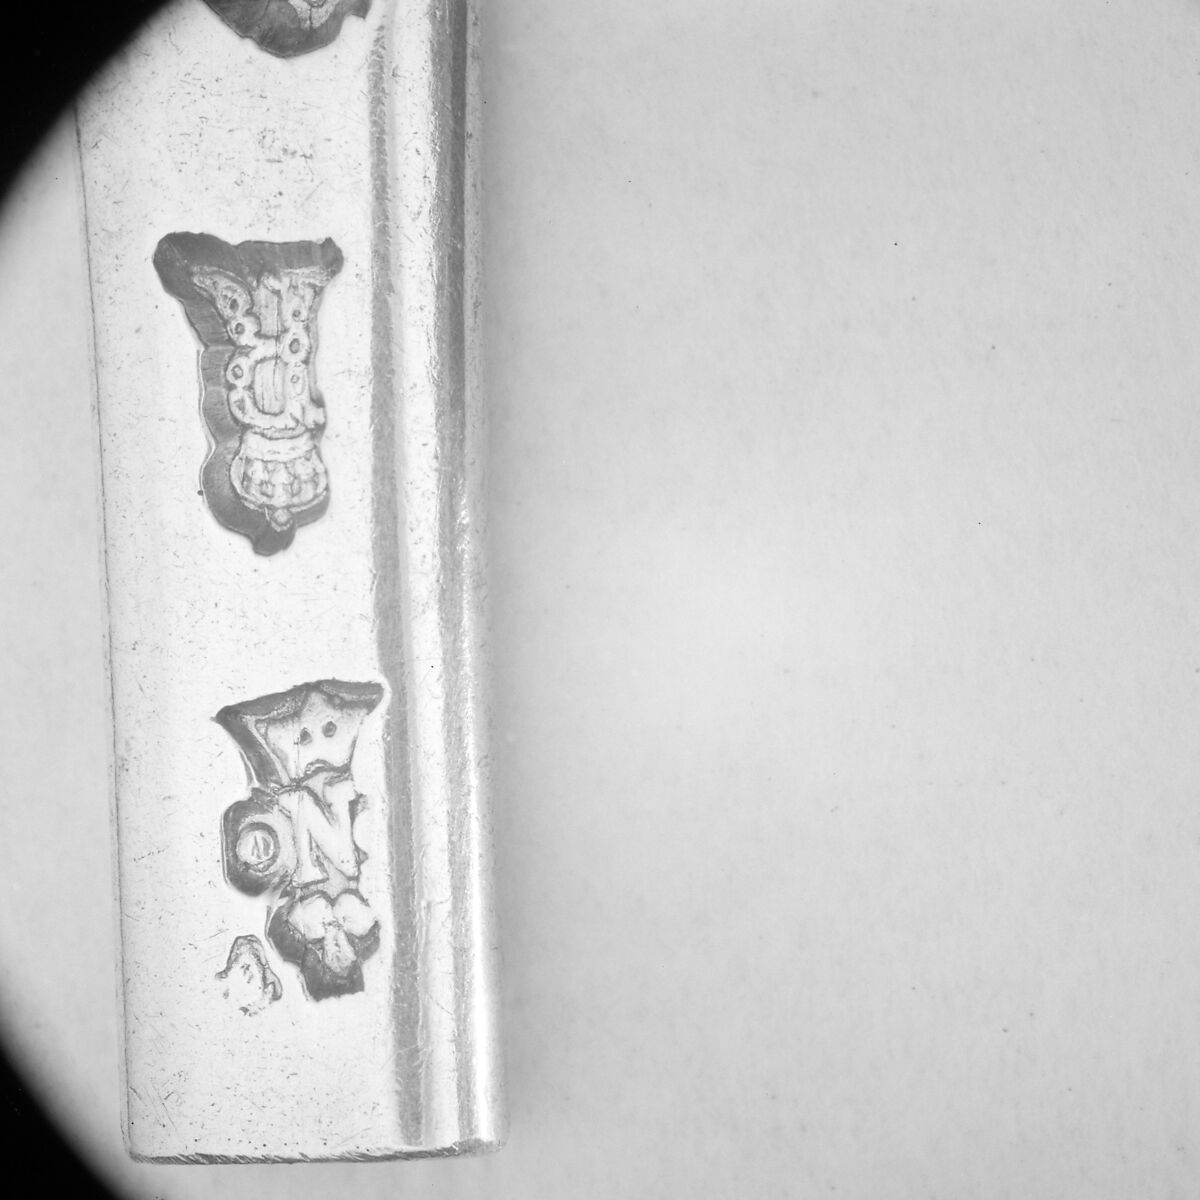 Section of a spoon handle, P. B., Orleans, Silver, French, Orléans 